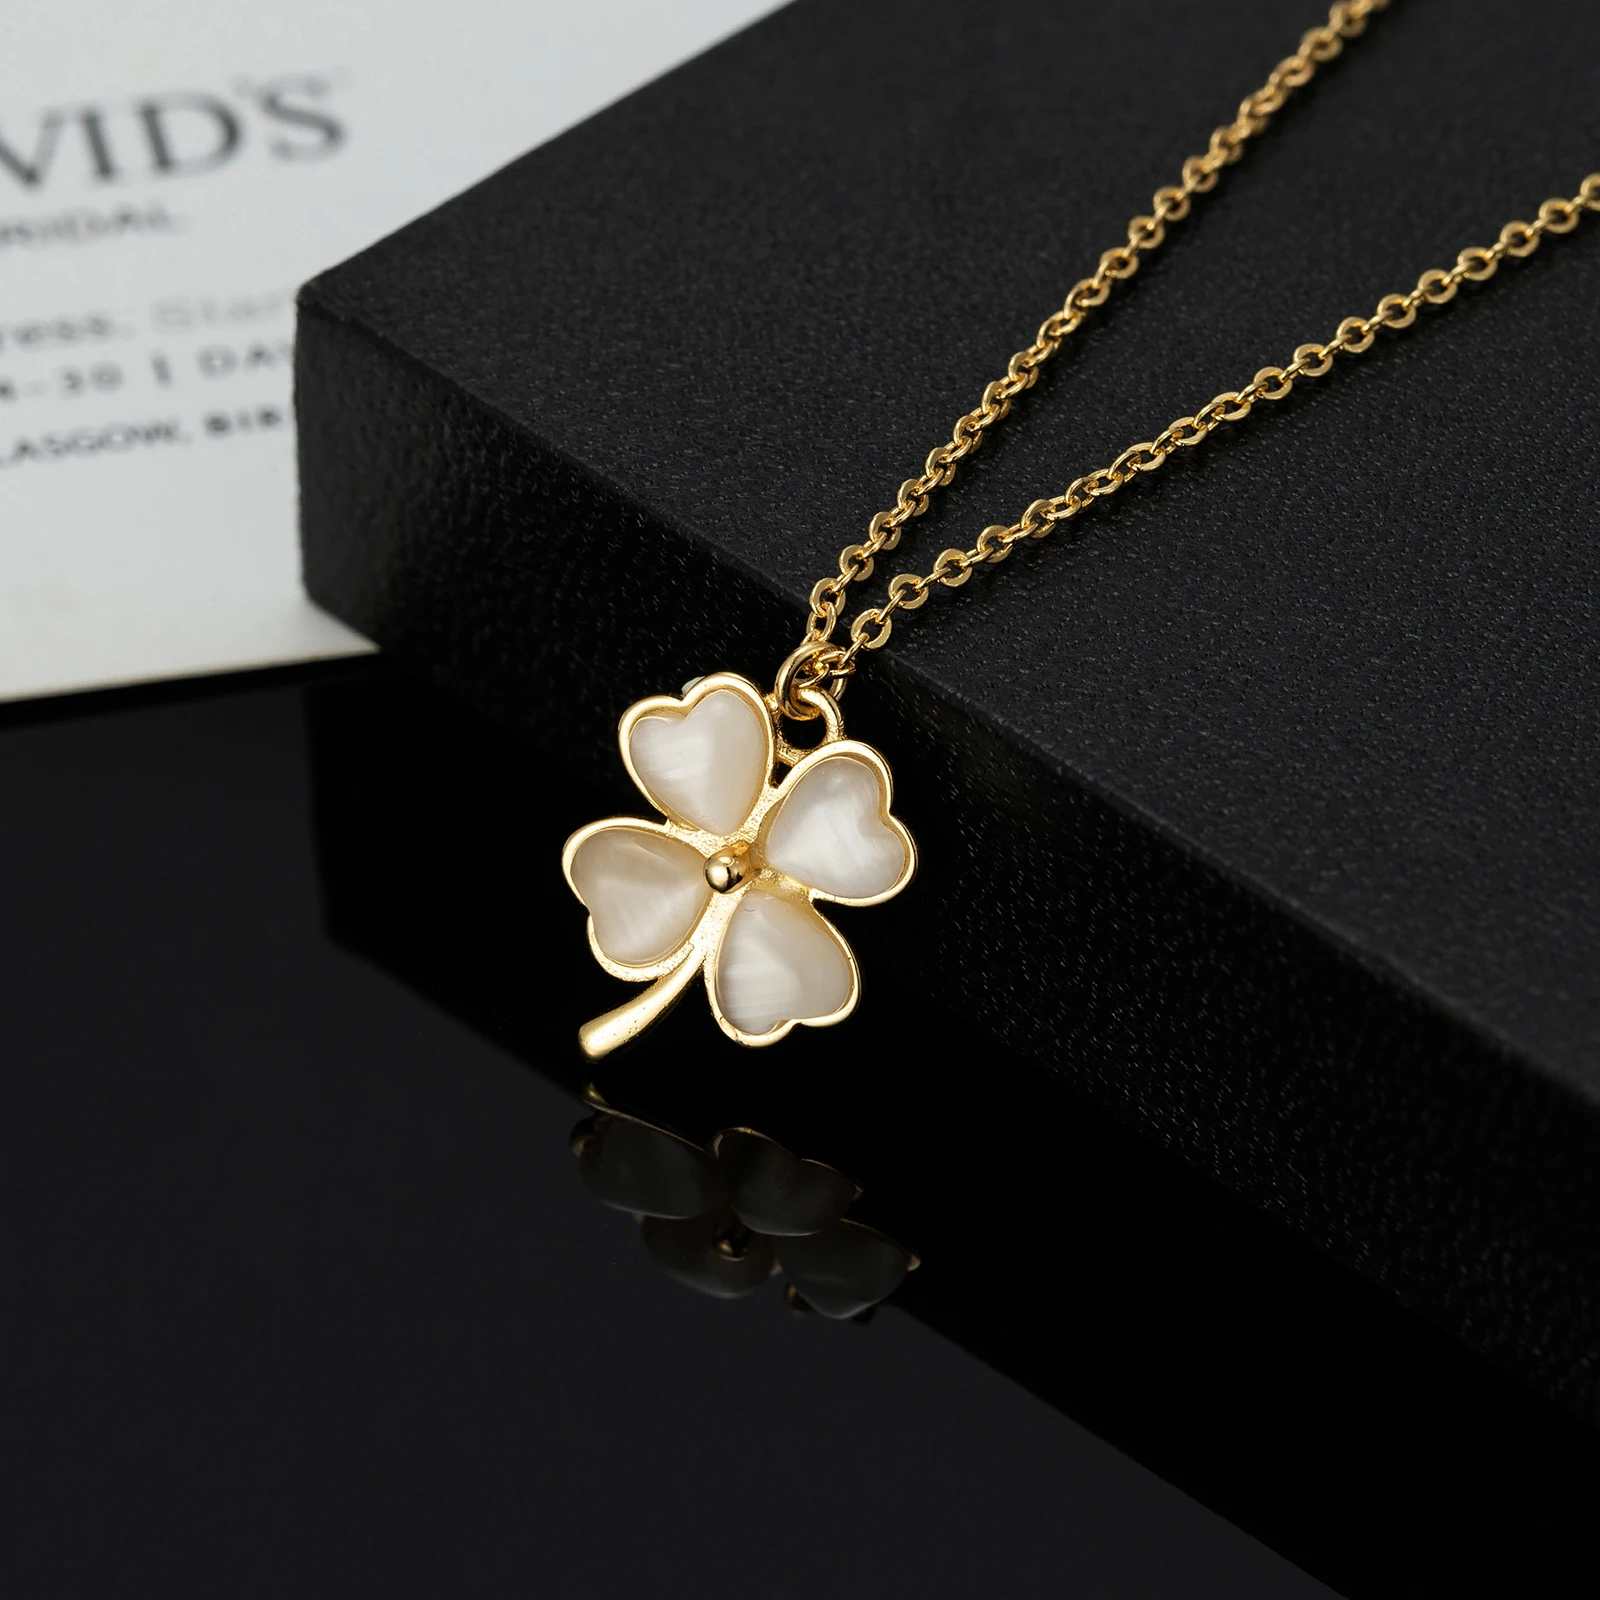 Four Leaf Clover Necklace in Brass with Gold Filled Chain